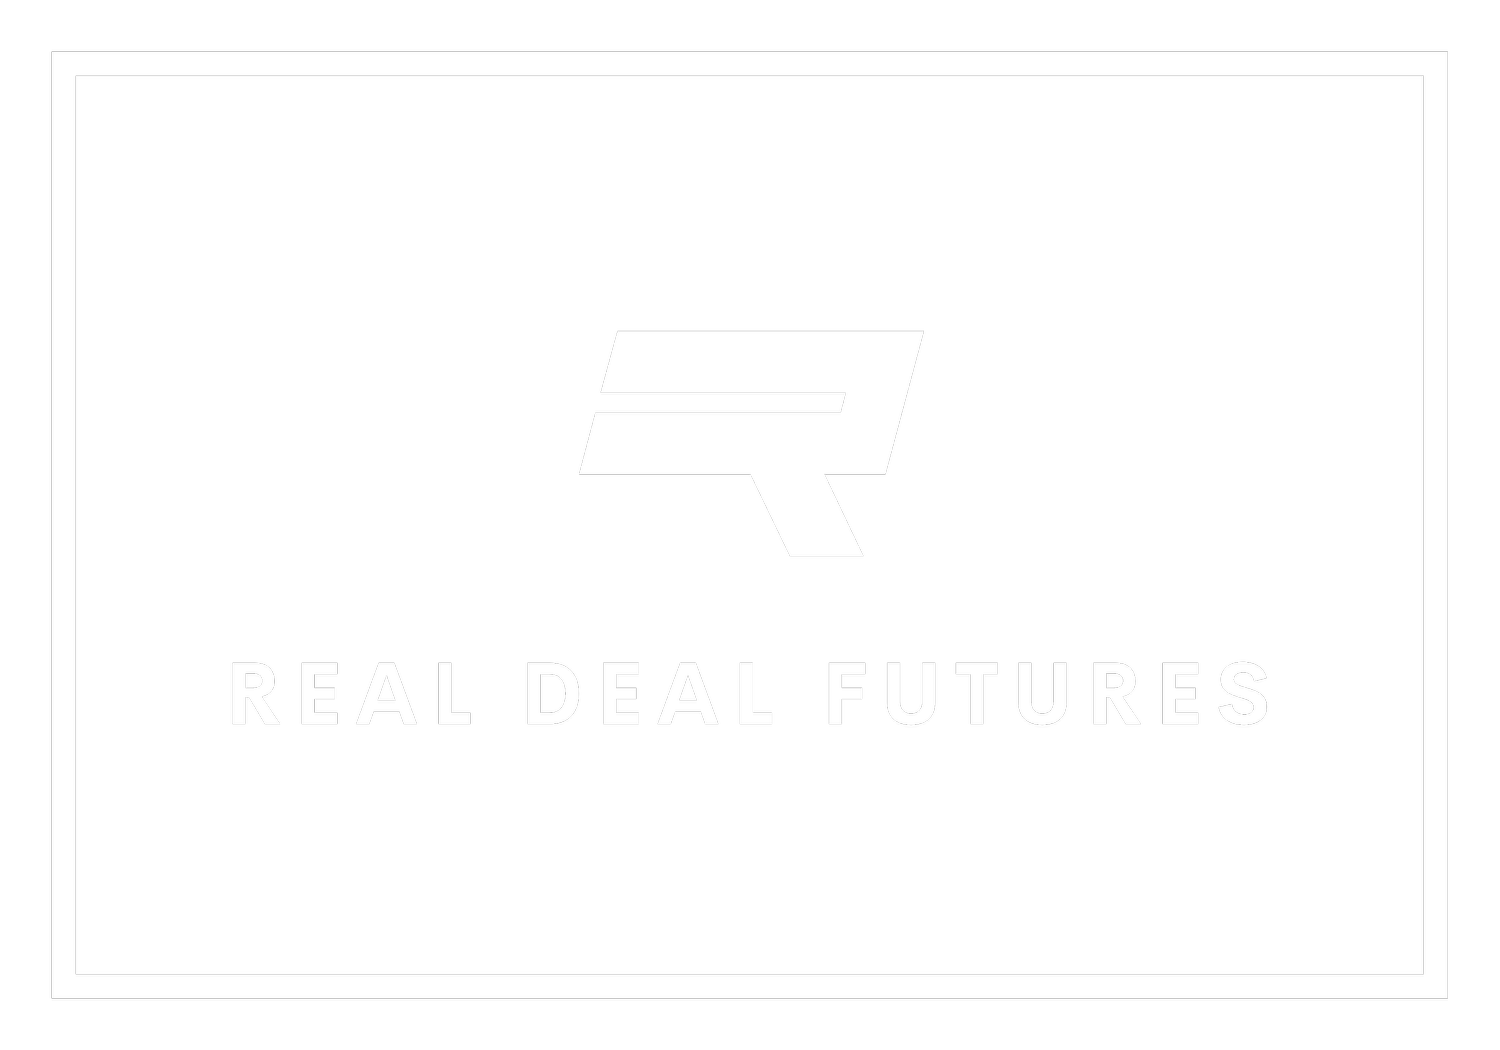 Real Deal Futures